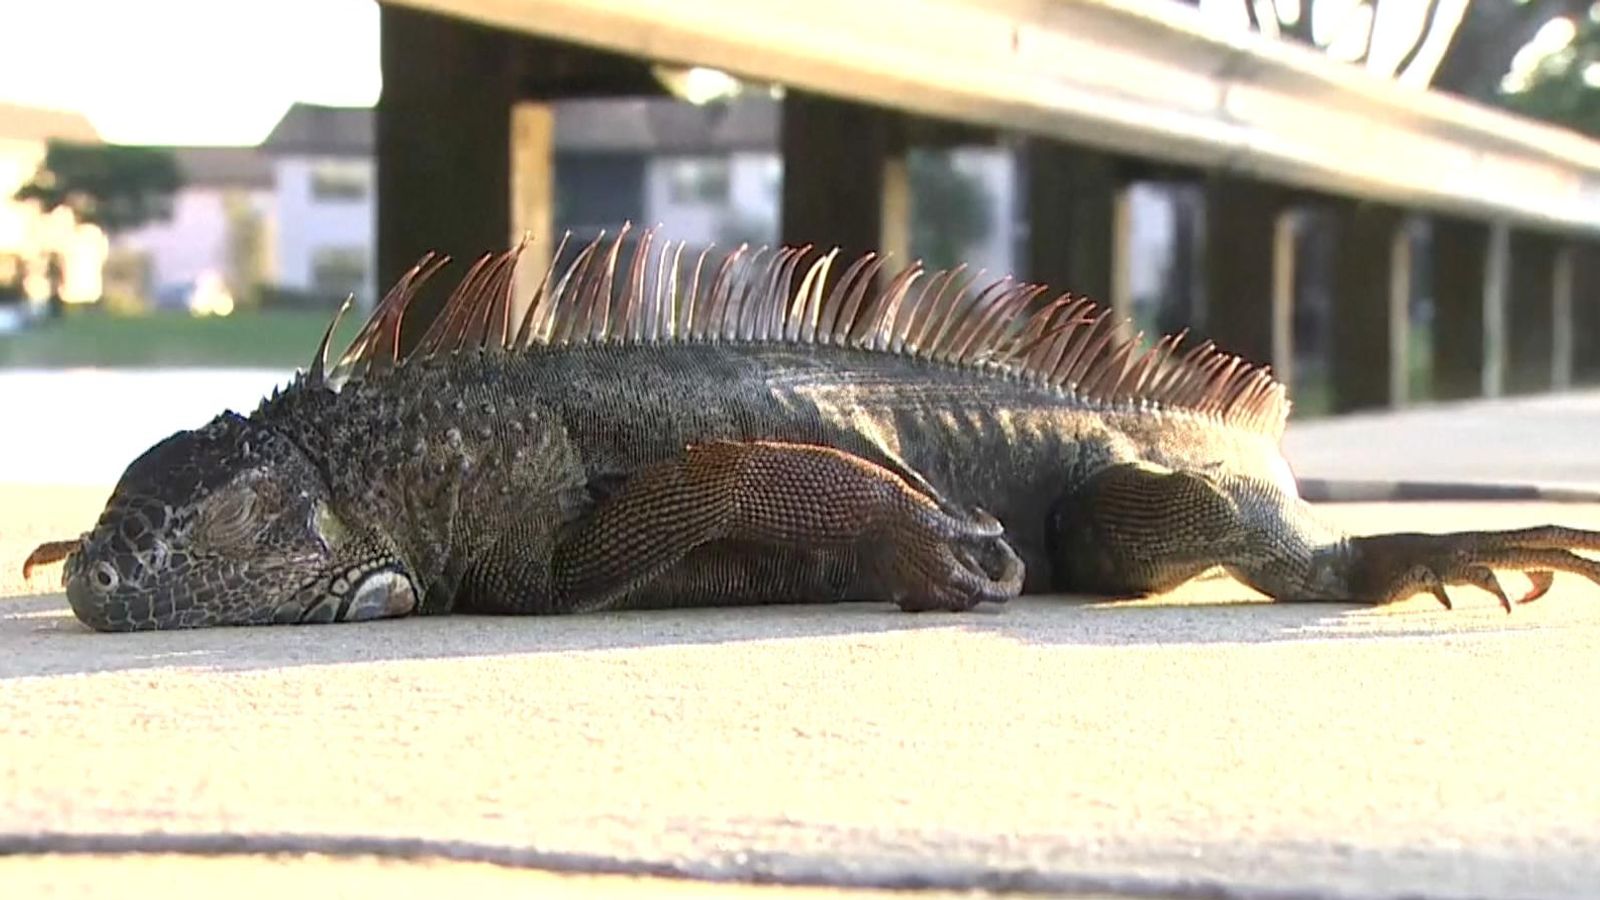 Frozen iguanas fall from trees as temperatures drop in Florida | US News | Sky News